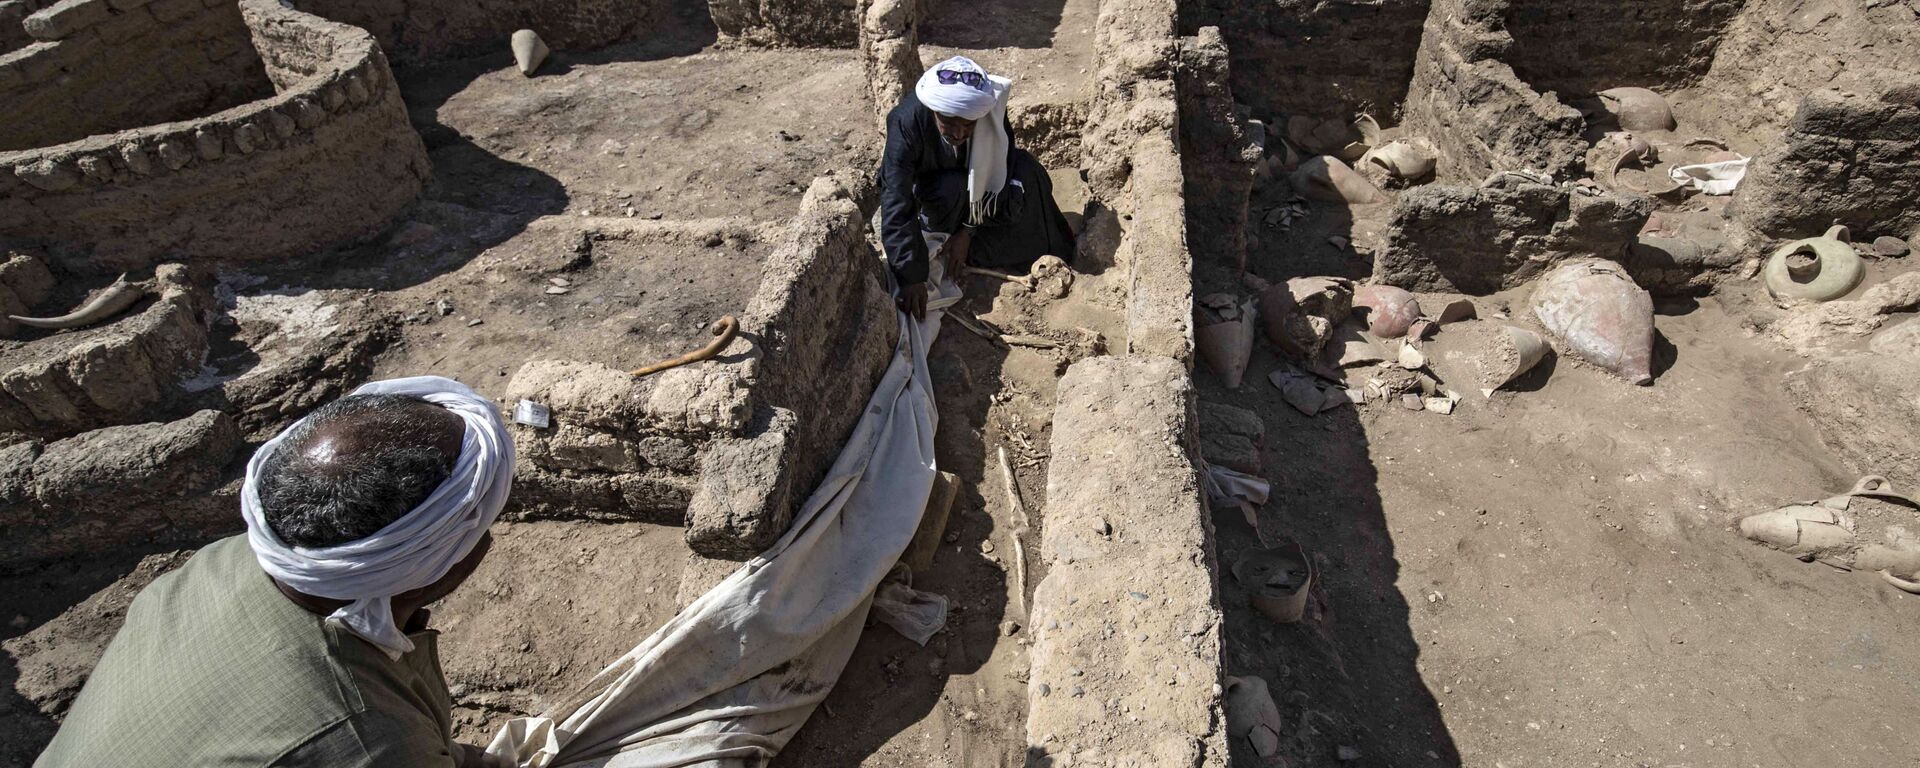 A picture taken on April 10, 2021, shows workers at the archaeological site of a 3000 year old city, dubbed The Rise of Aten, dating to the reign of Amenhotep III, uncovered by the Egyptian mission near Luxor. - Archaeologists have uncovered the remains of an ancient city in the desert outside Luxor that they say is the largest ever found in Egypt and dates back to a golden age of the pharaohs 3,000 years ago. Famed Egyptologist Zahi Hawass announced the discovery of the lost golden city, saying the site was uncovered near Luxor, home of the legendary Valley of the Kings.  - Sputnik International, 1920, 11.04.2021